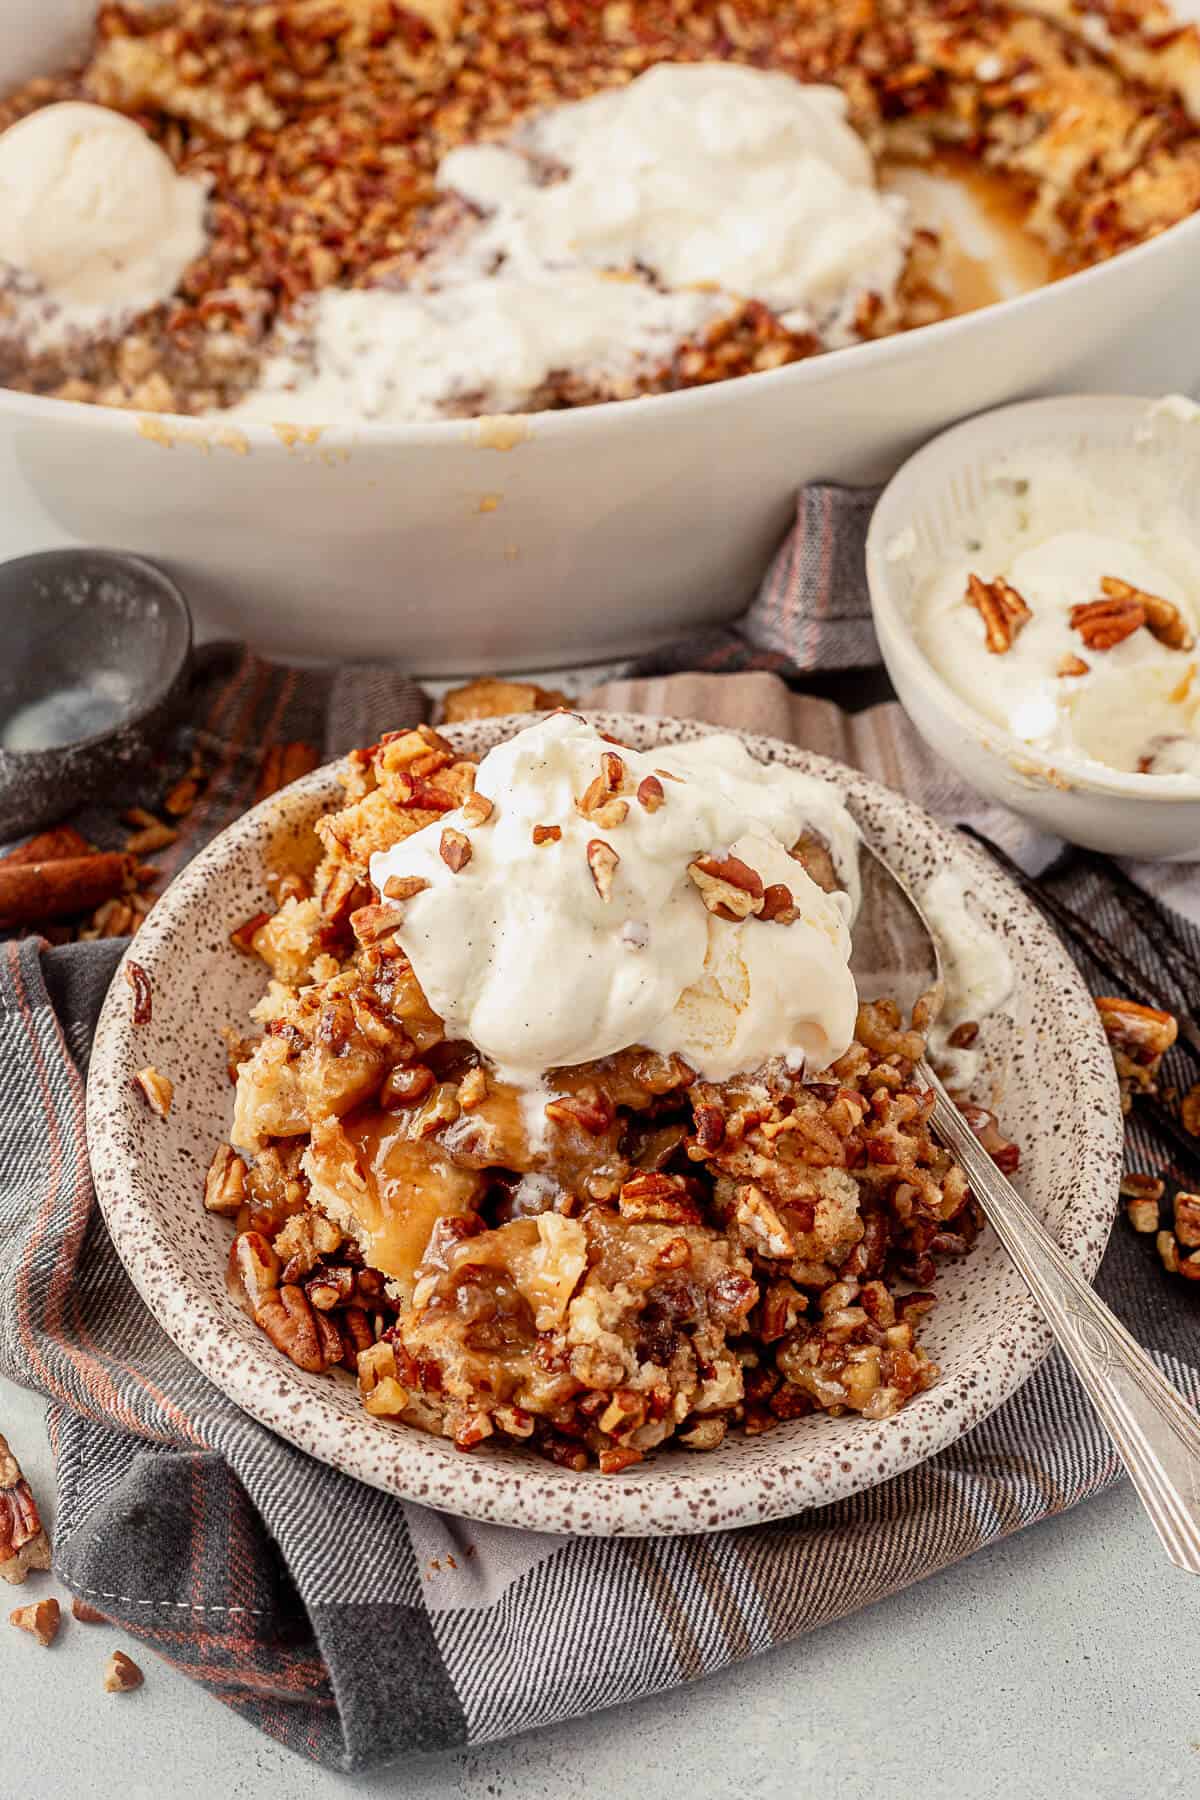 a plate full of pecan pie cobbler with whipped cream and a spoon next to the large dish of cobbler